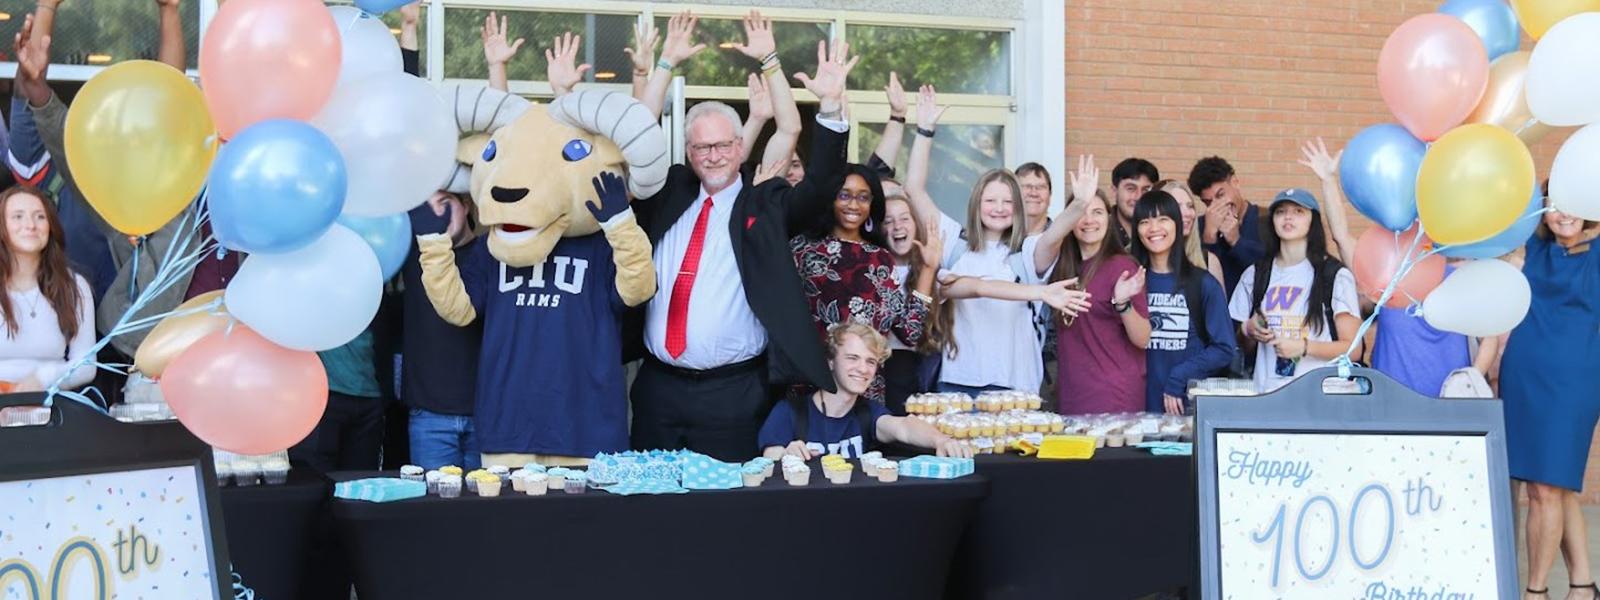 Interim President Dr. Rick Christman and CIU mascot Rammy join with students to celebrate. (Photo by Chariti Mealing, CIU Student Photographer) 